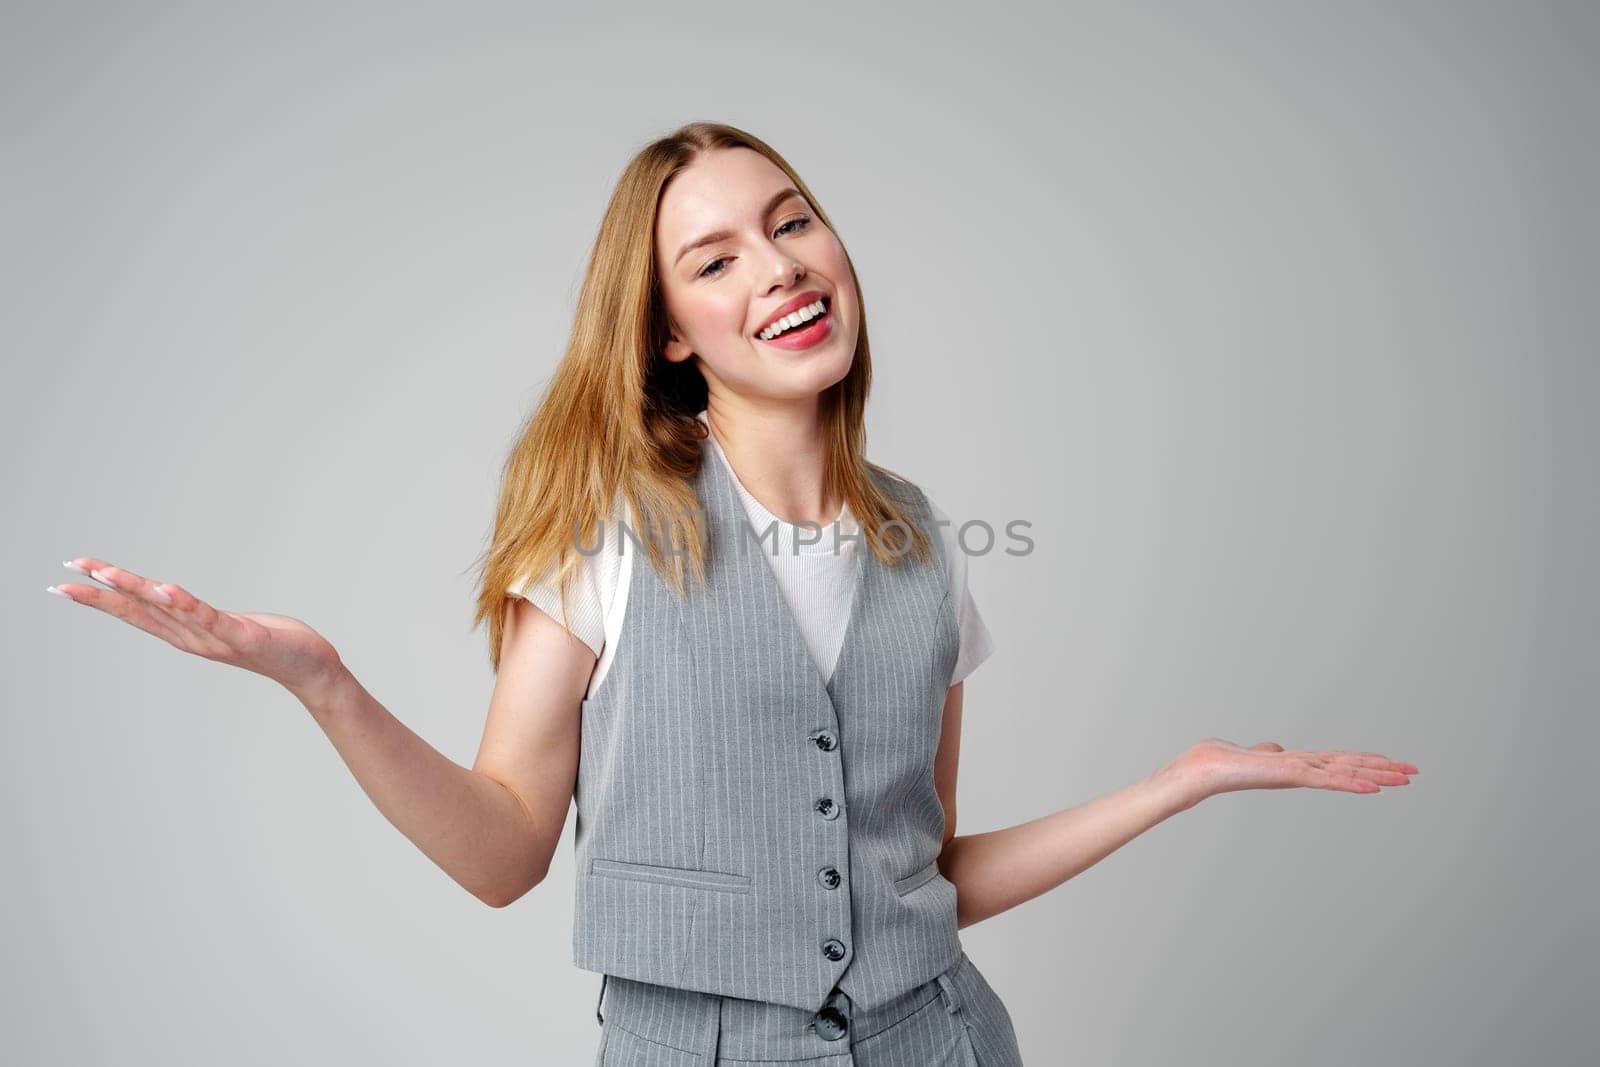 Joyful Young Blonde Woman Smiling against gray background by Fabrikasimf